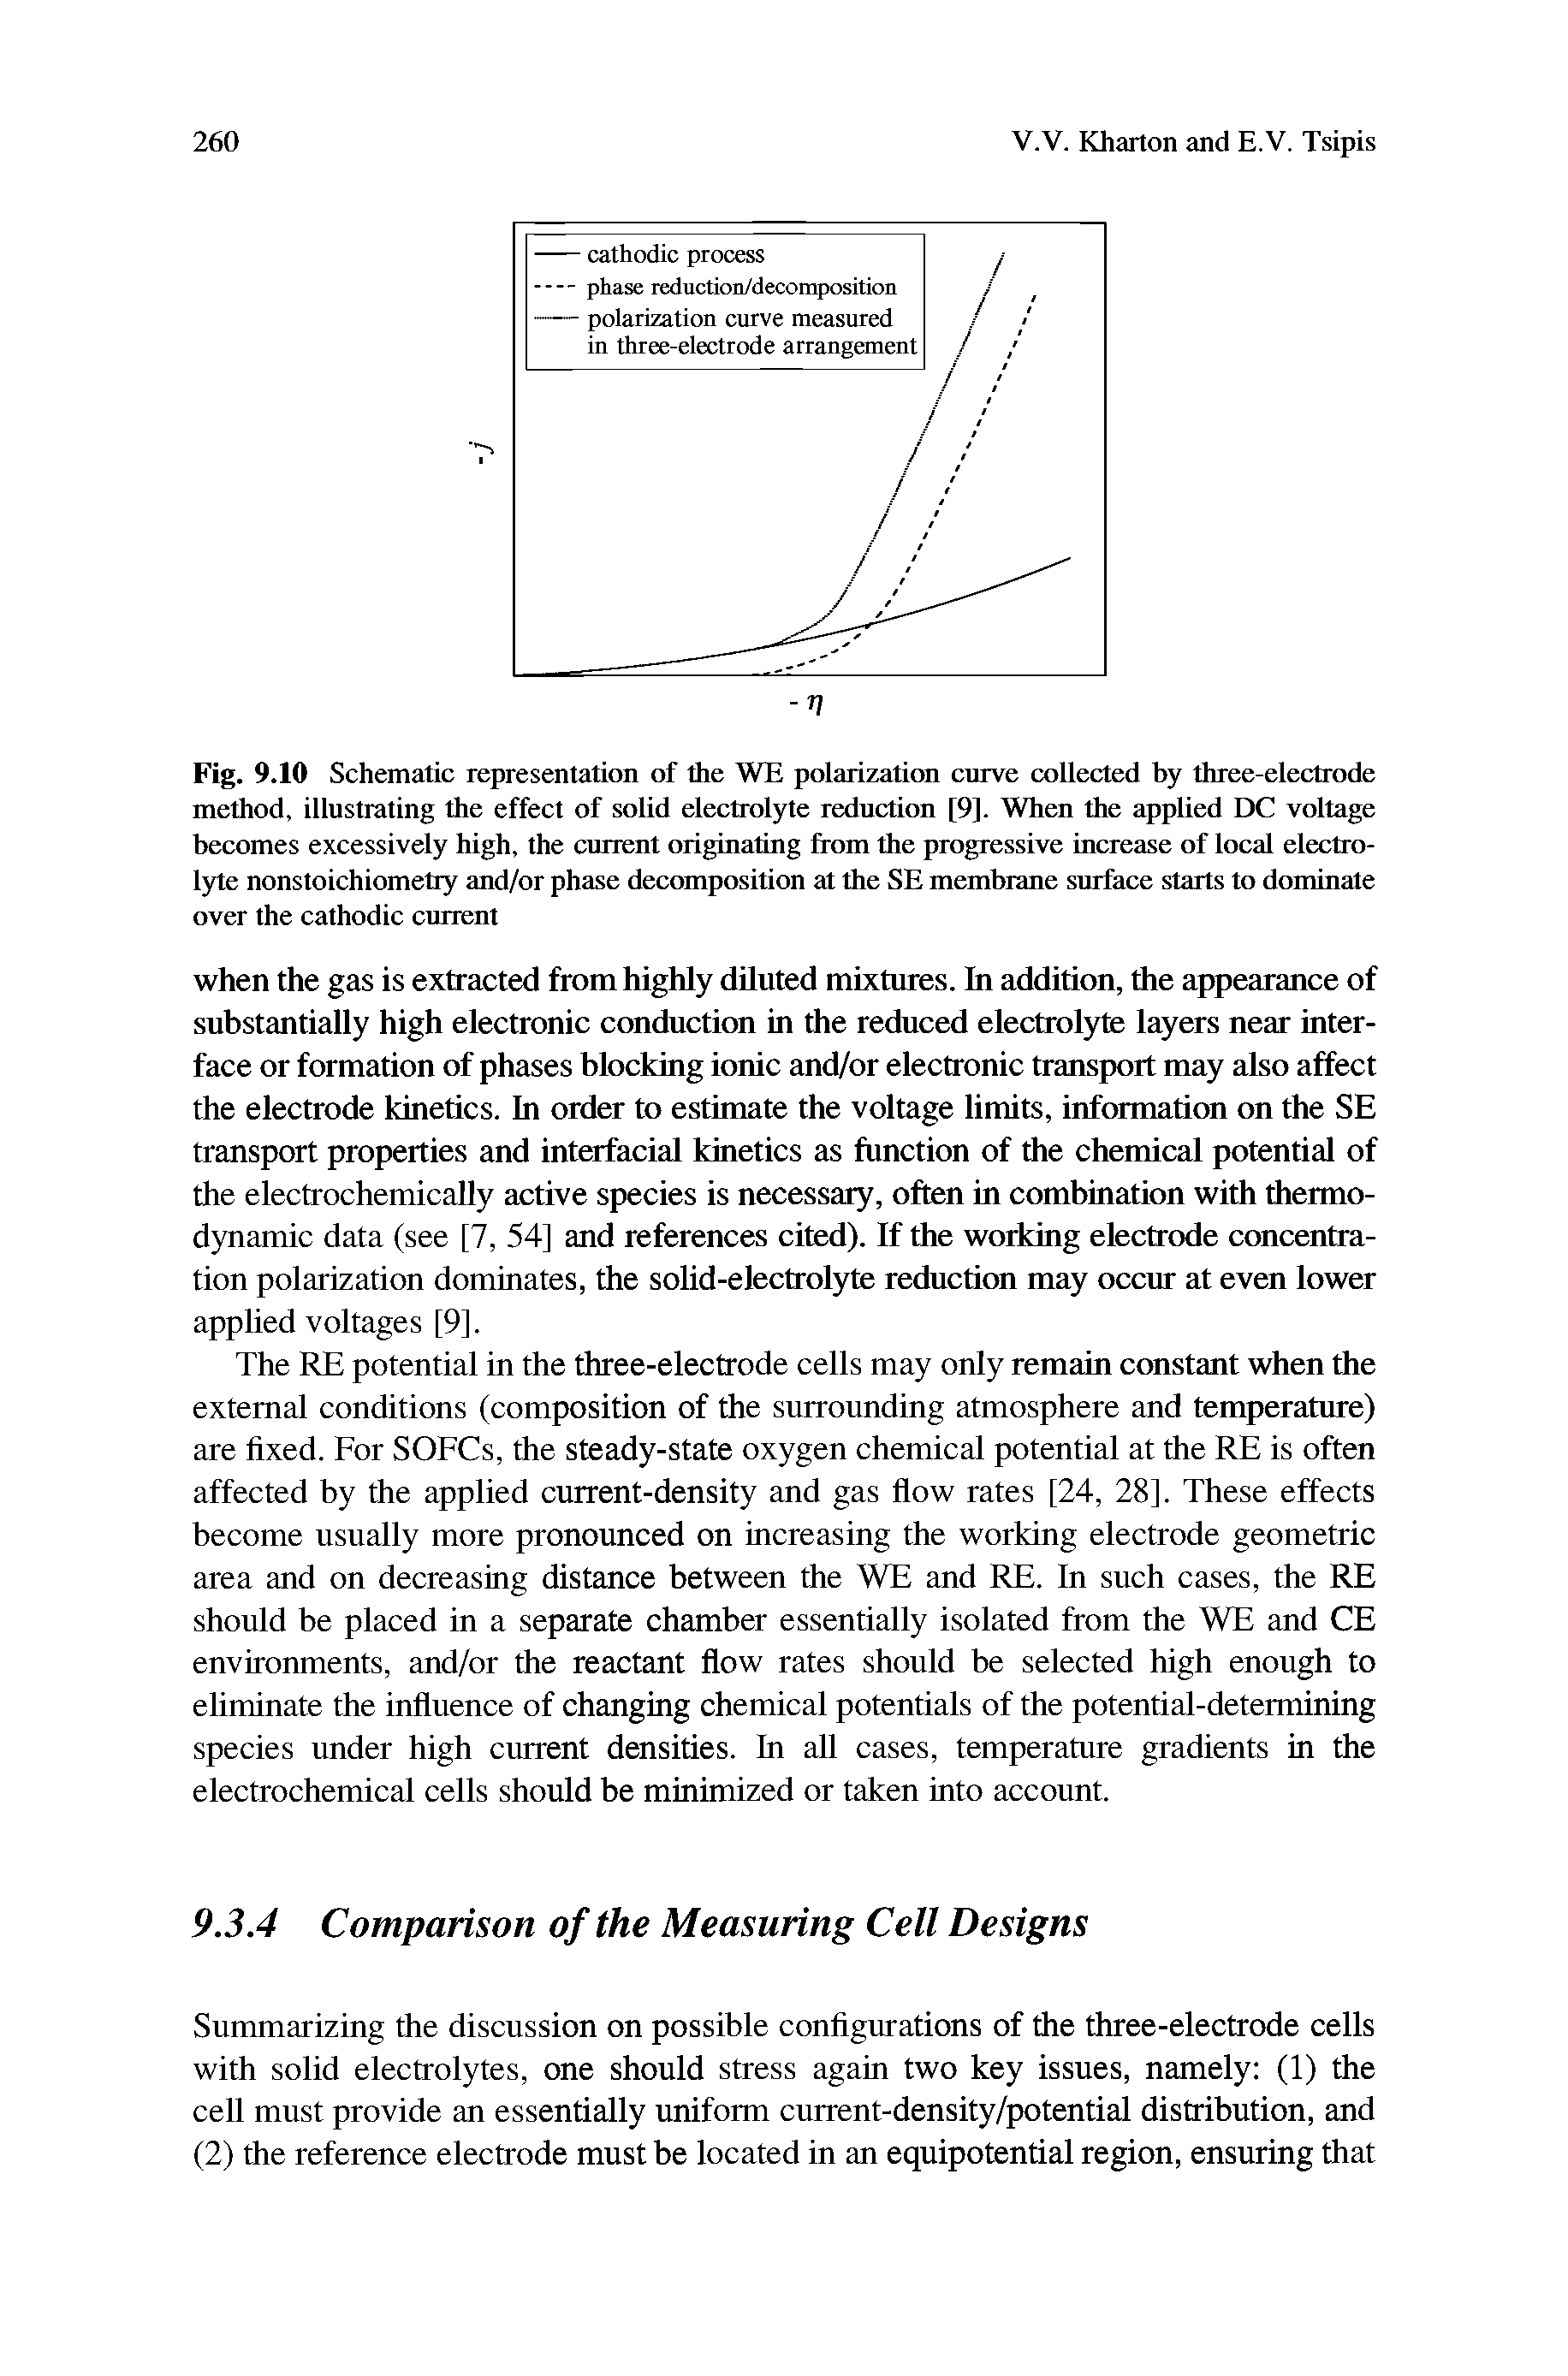 Fig. 9.10 Schematic representation of the WE polarization curve collected by three-electrode method, illustrating the effect of solid electrolyte reduction [9]. When the applied DC voltage becomes excessively high, the current originating from the progressive increase of local electrolyte nonstoichiometry and/or phase decomposition at the SE membrane surface starts to dominate over the cathodic current...